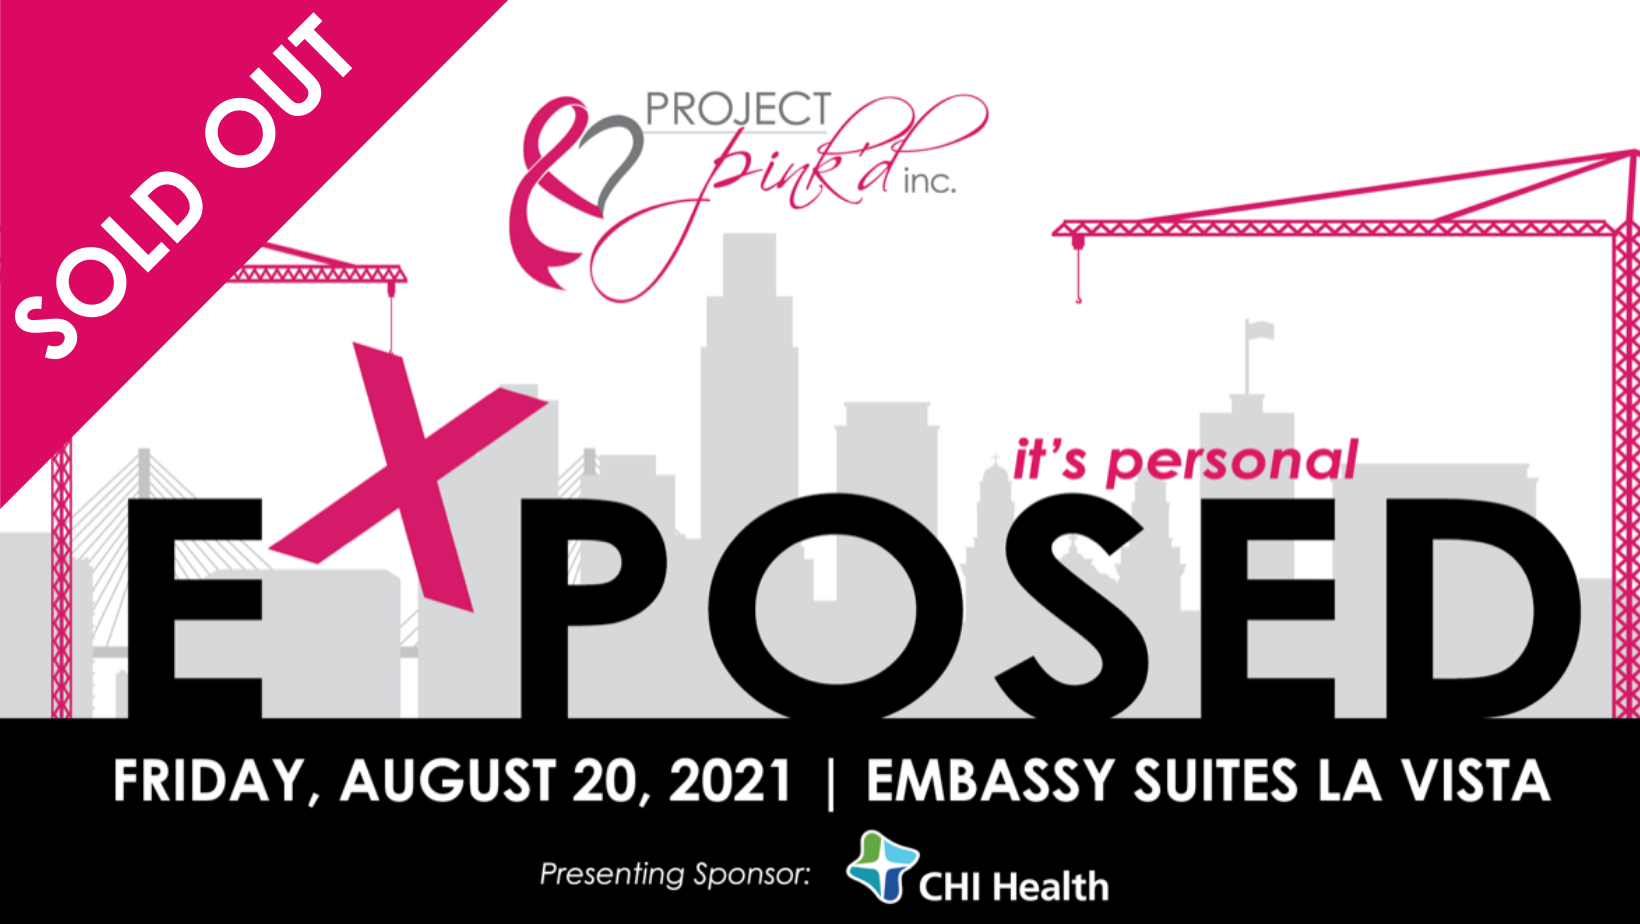 Project Pink’d EXPOSED: It’s Personal 12th Annual Benefit Raises Over Half a Million Dollars for Breast Cancer Survivors